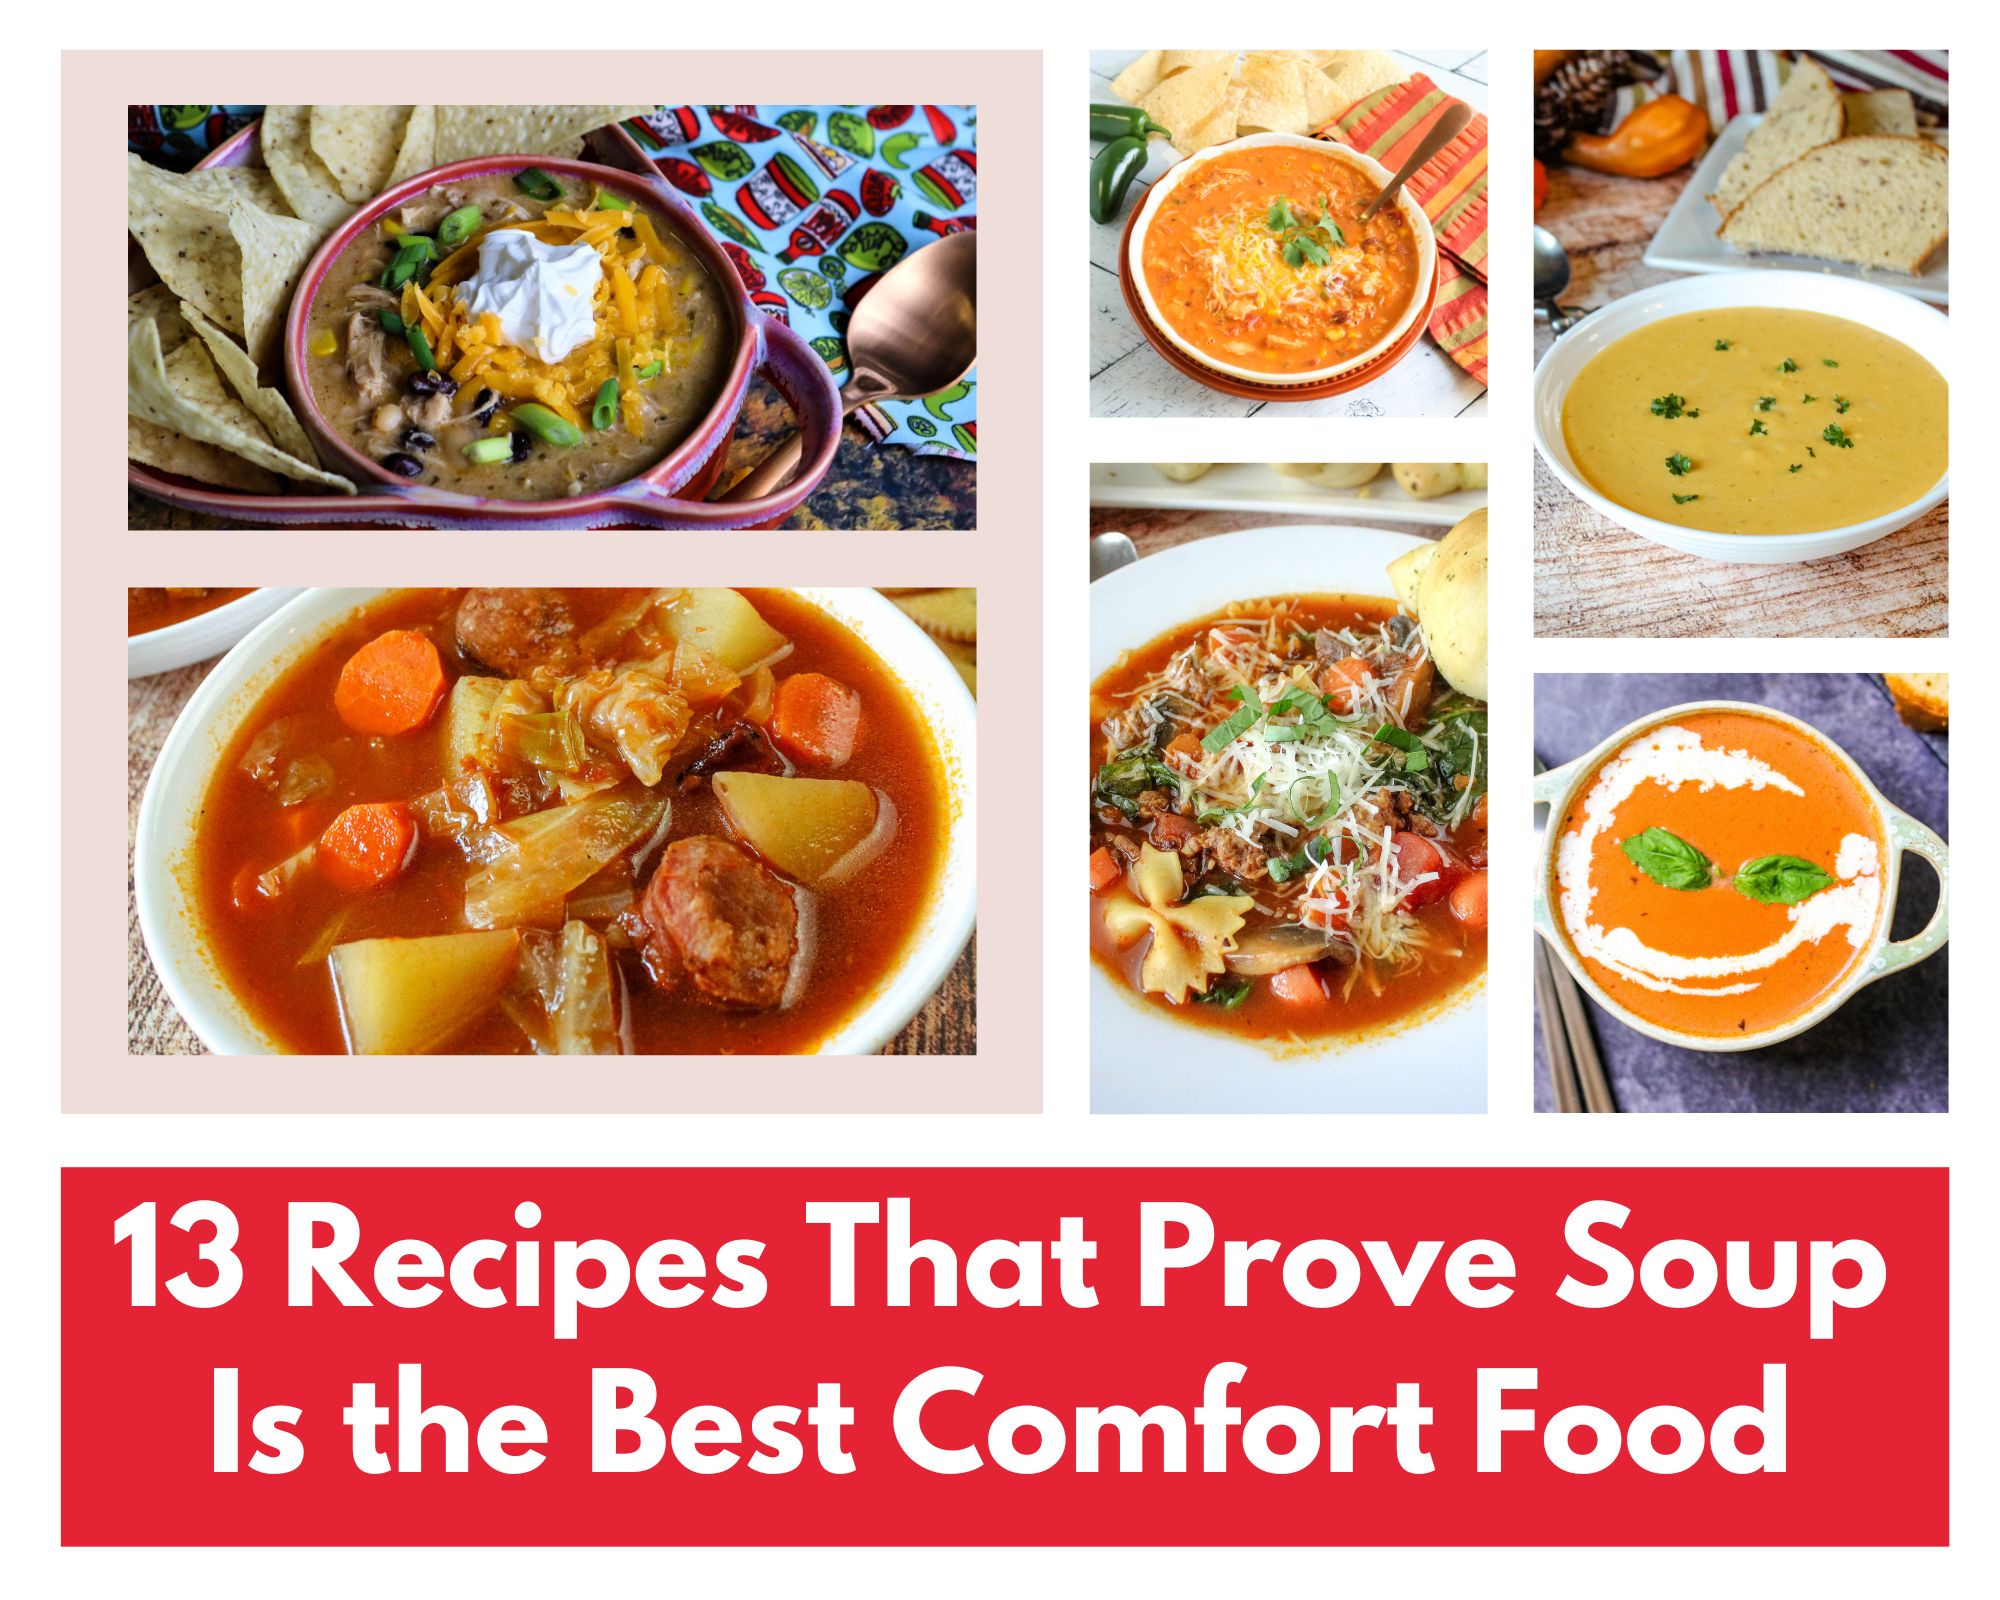 13 Recipes That Prove Soup Is the Best Comfort Food